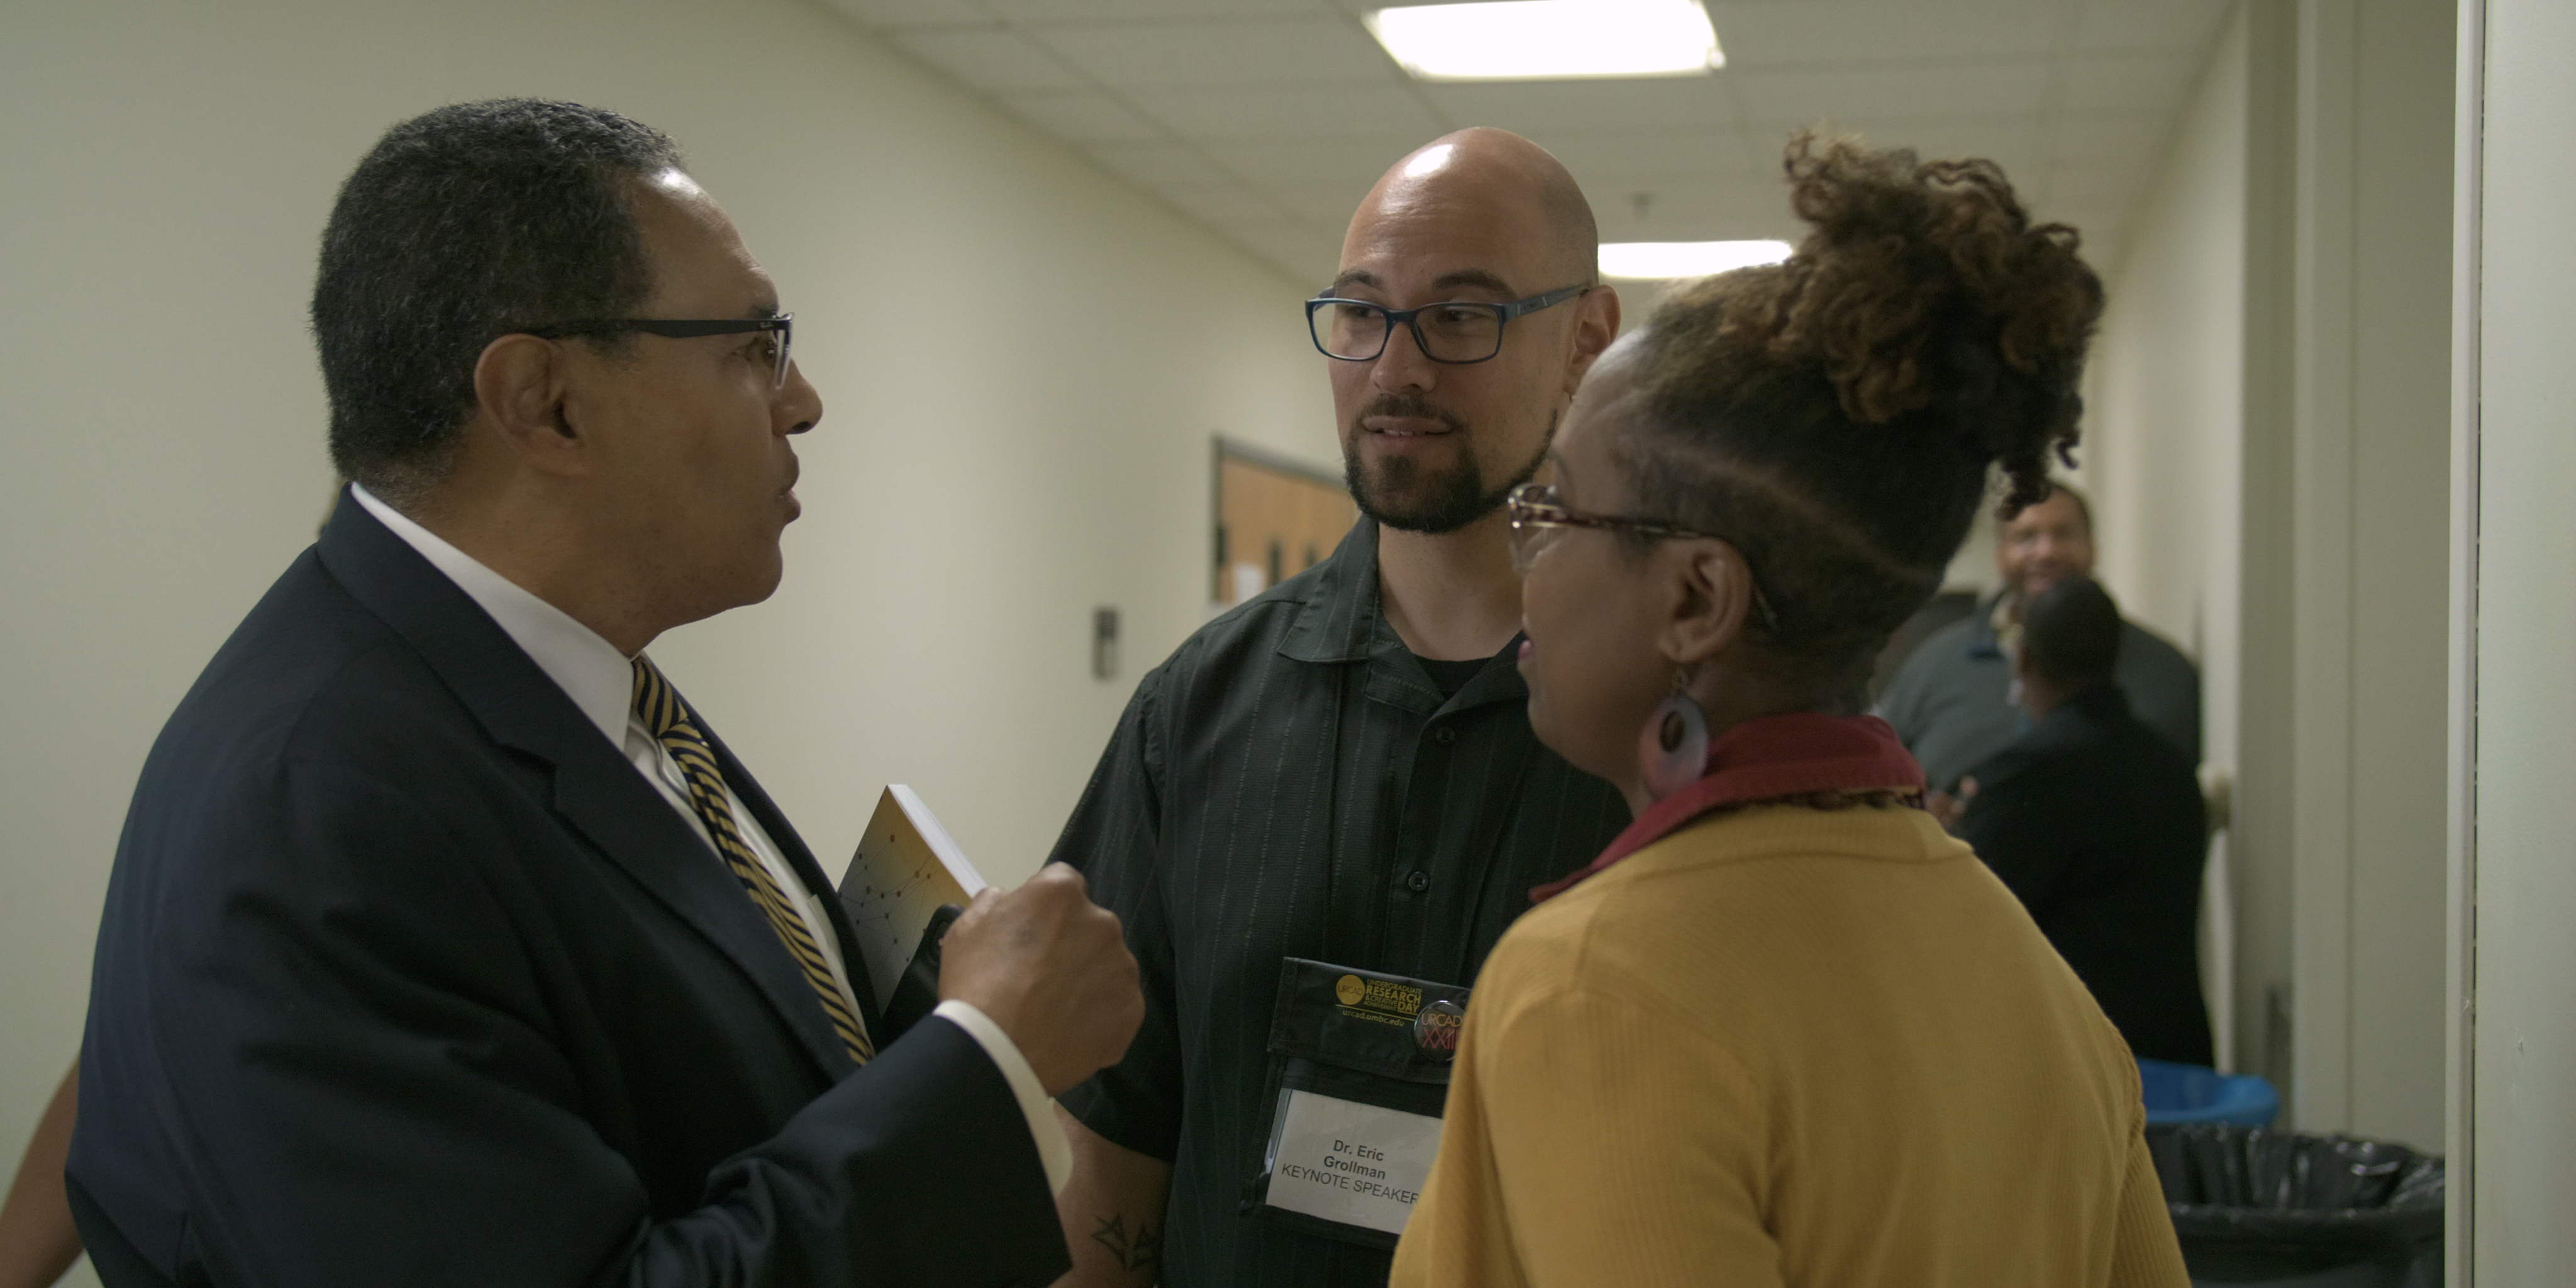 Dr. Hrabowski speaks with Keynote speaker Dr. Eric Grollman and Lisa Gray, UMBC's Associate Director of Diversity and Inclusion.